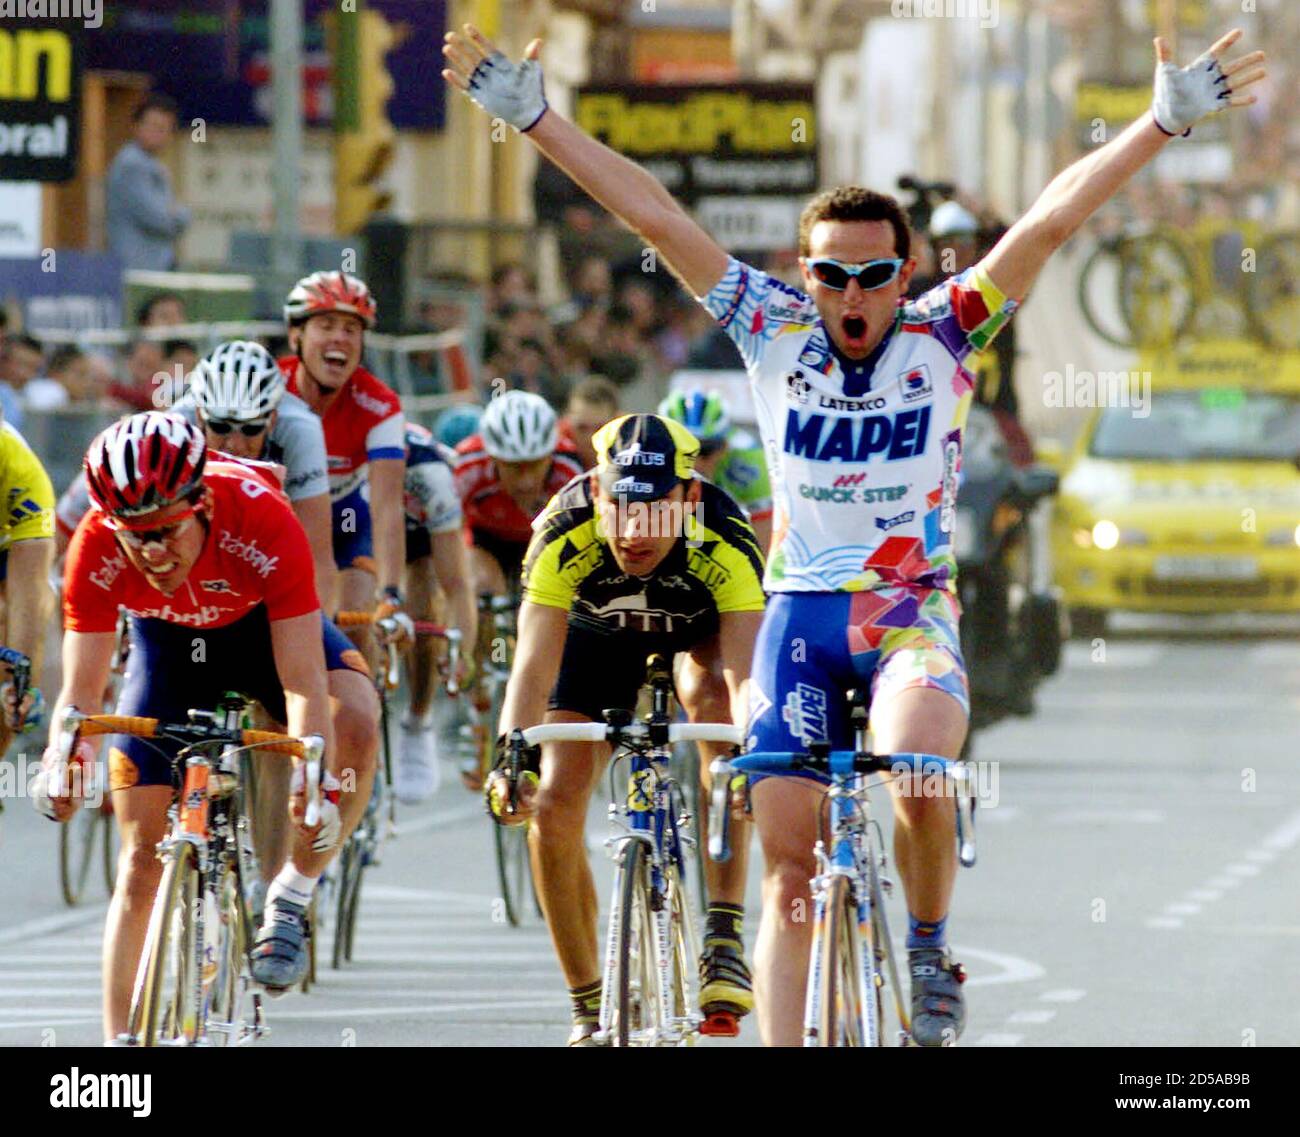 Italian rider Giuliano Figueras raises his arms as he crosses the finish  line to win the fourth stage of the Catalan cycling week March 25. Behind  Figueras are third-placed Niki Aebersold of